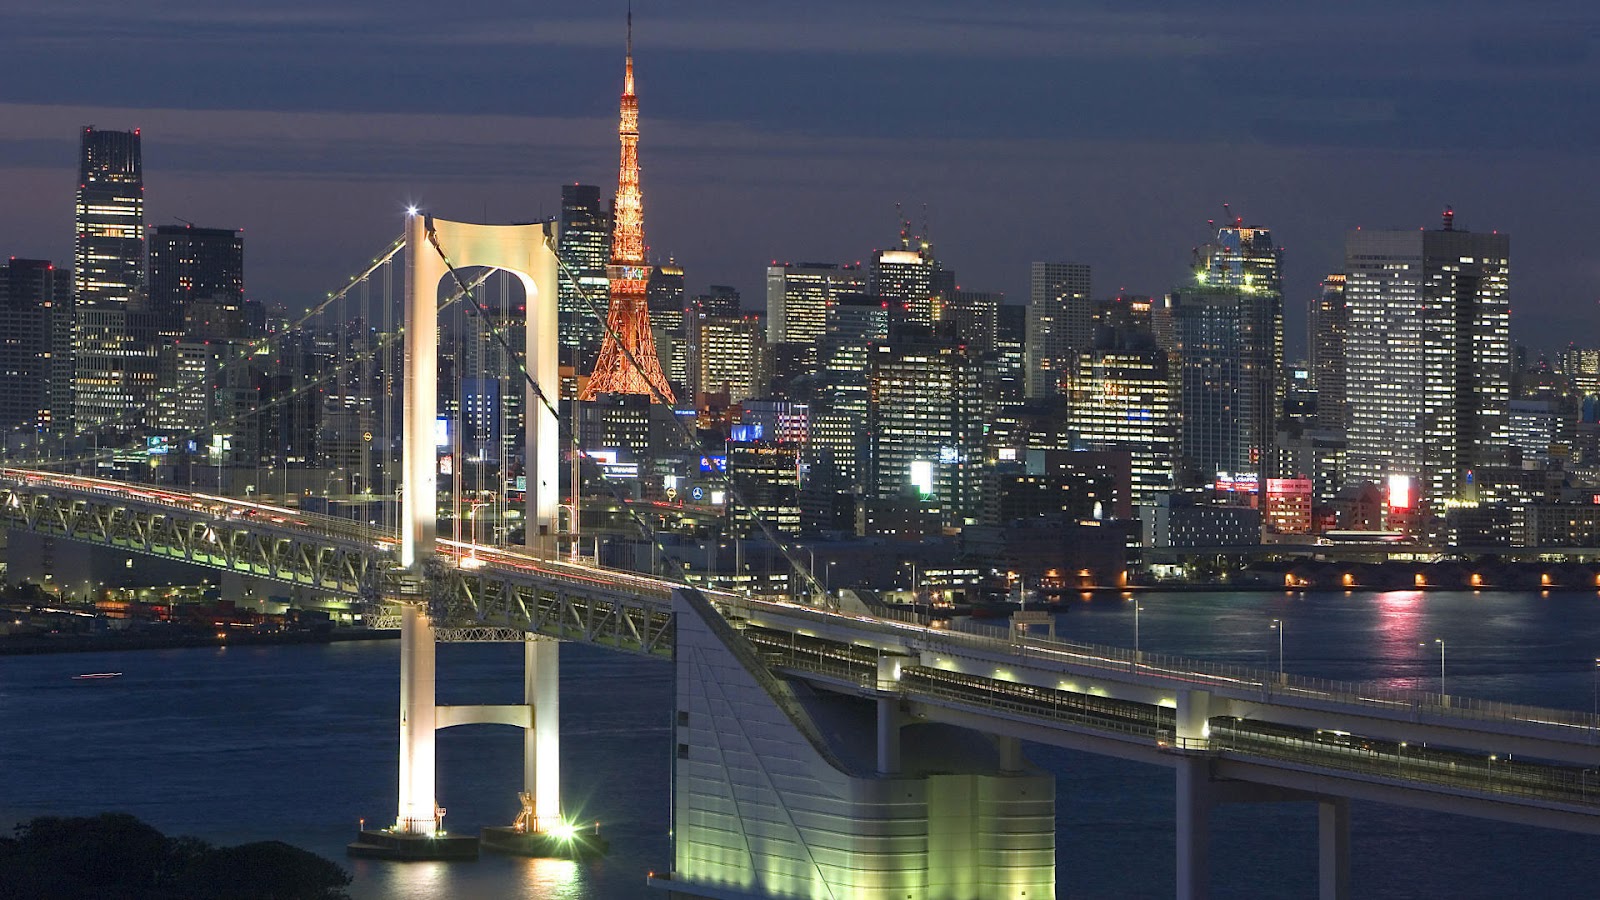 Tokyo City | HD Wallpapers (High Definition)|HDwalle